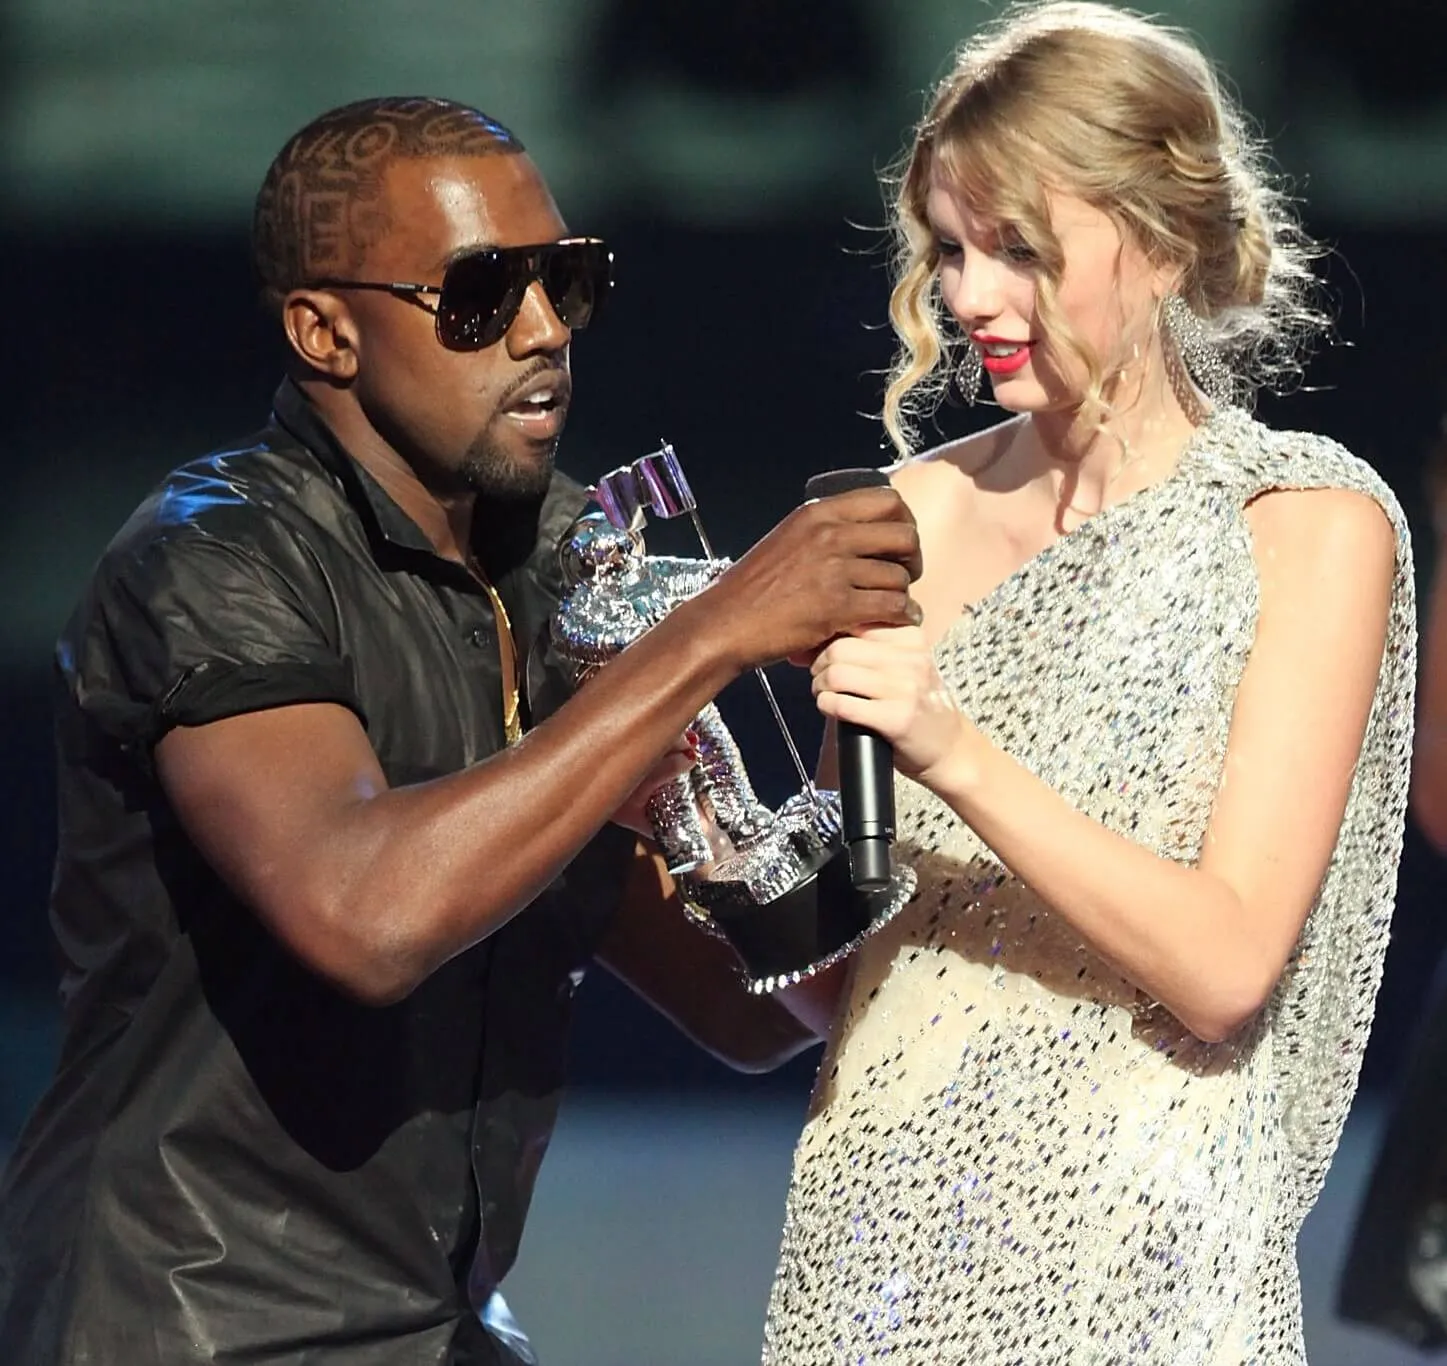 Taylor Swift wrote a song about Kanye West after he interrupted her